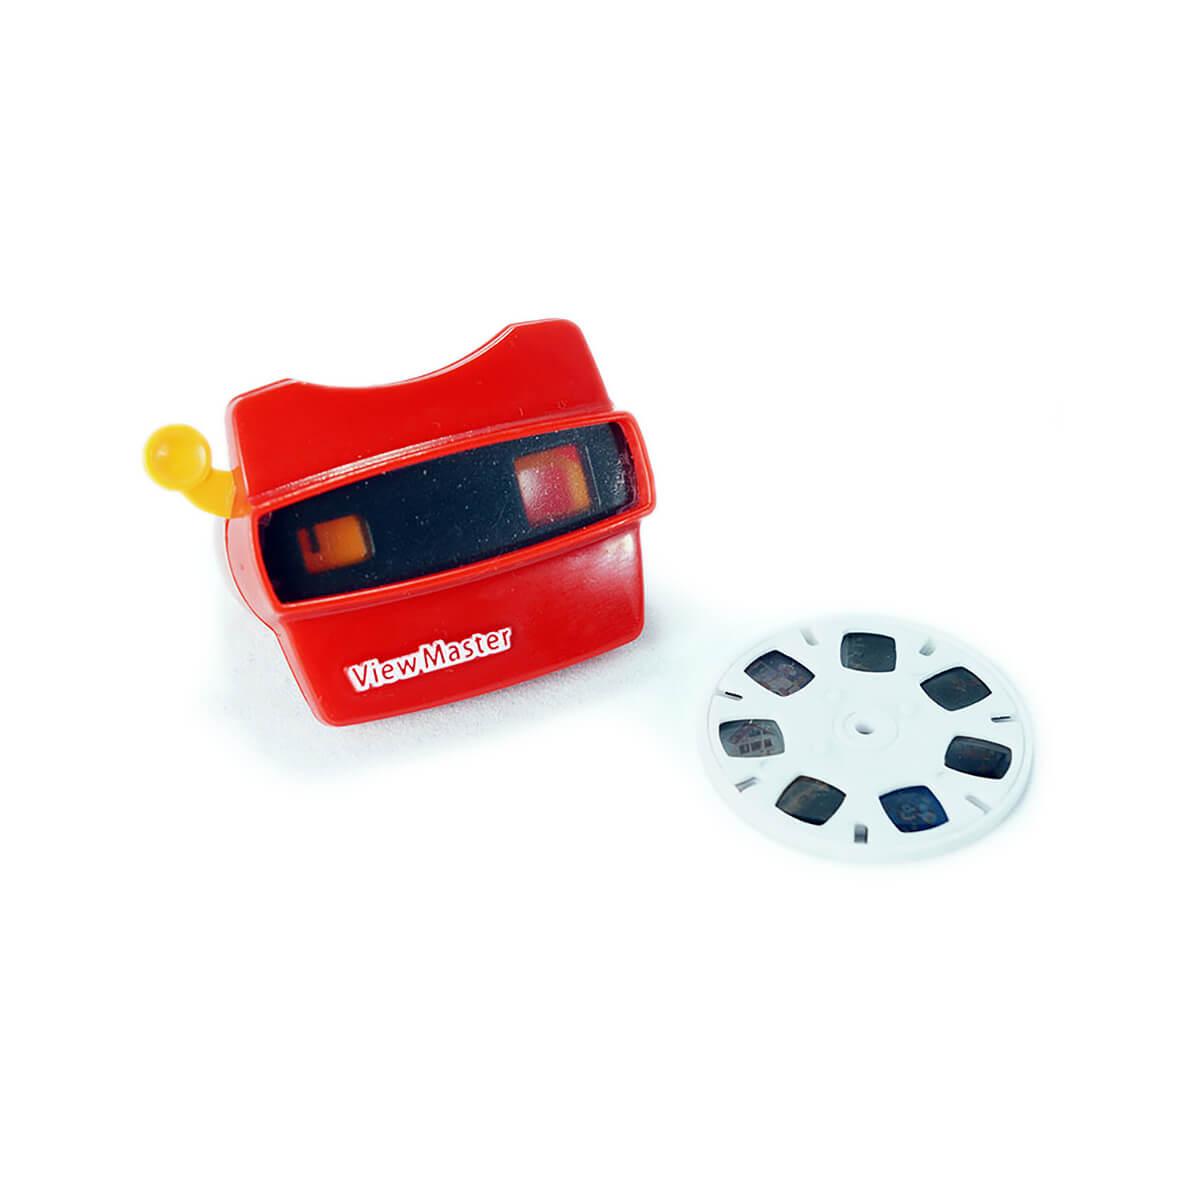  Space Shuttle - Classic ViewMaster - 3 Reel Set - 21 3D Images  : Toys & Games